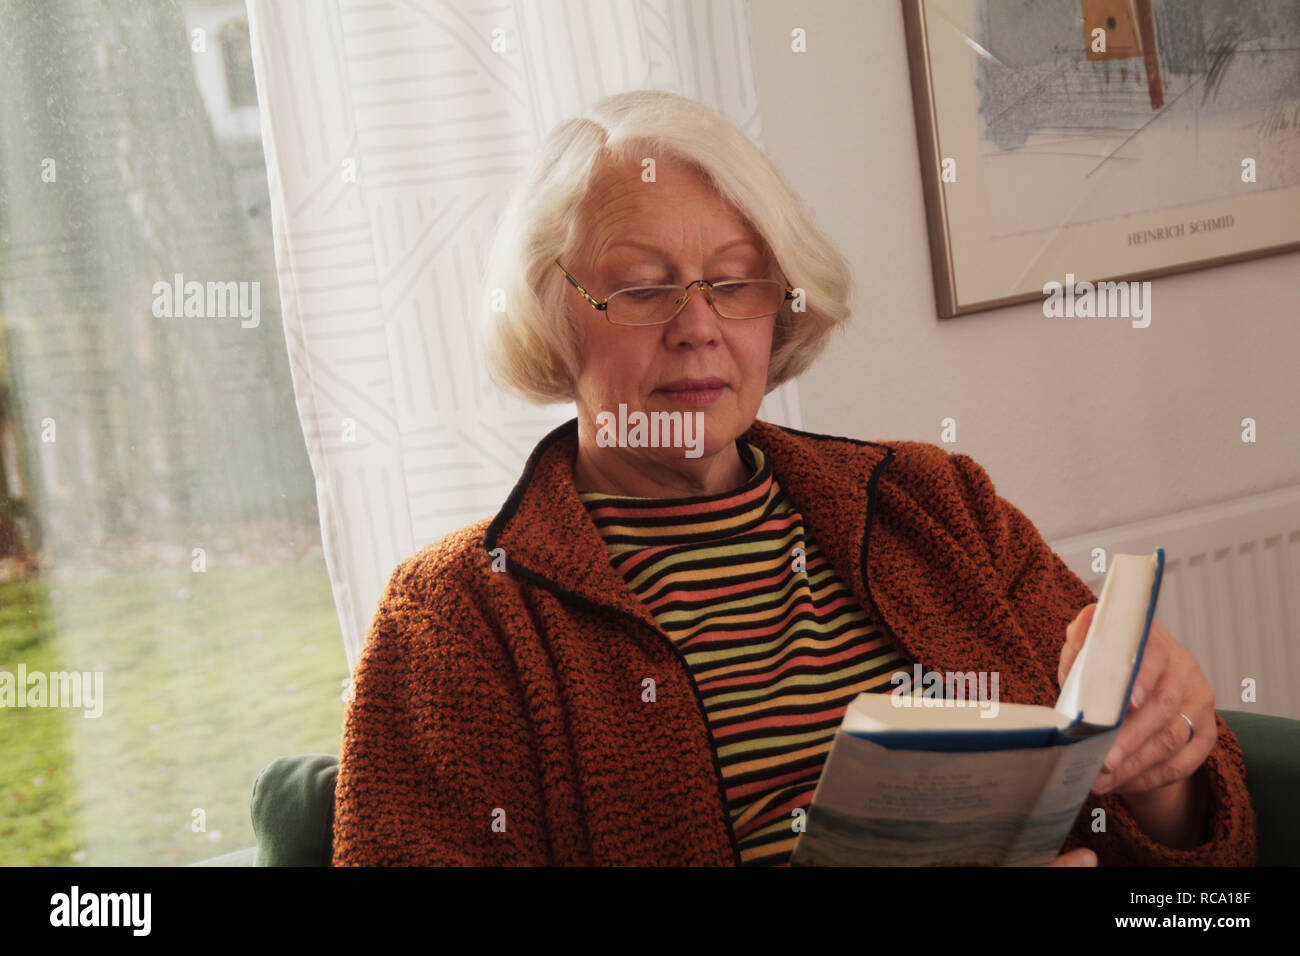 Frau mittleren Alters liest Buch auf einem Sofa | middleaged woman is reading a book on a couch Stock Photo